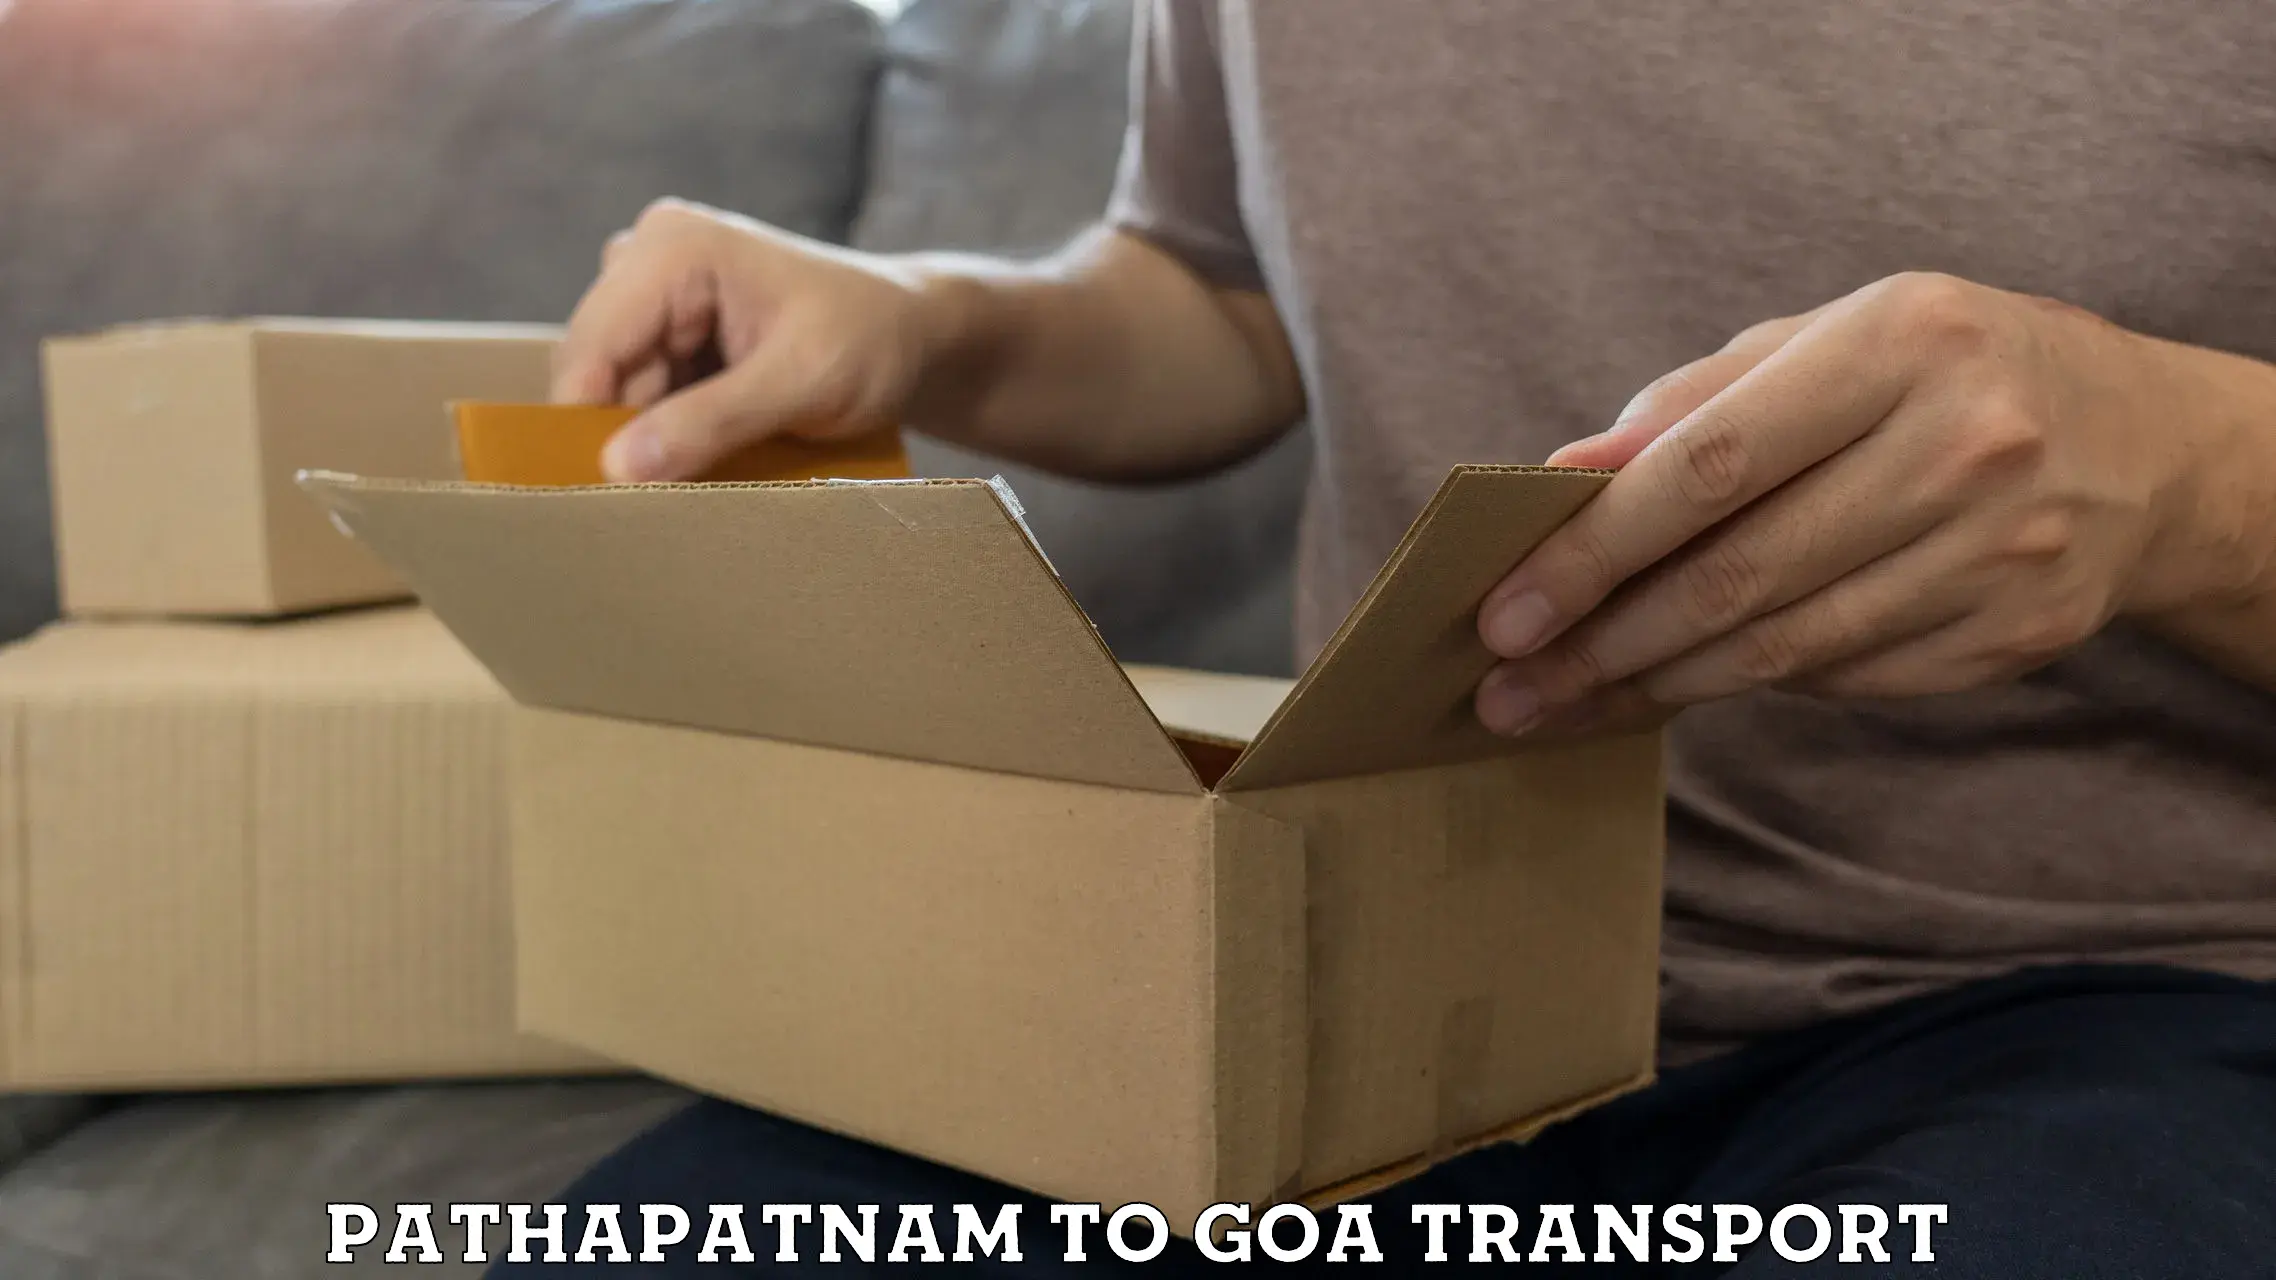 Cycle transportation service in Pathapatnam to Goa